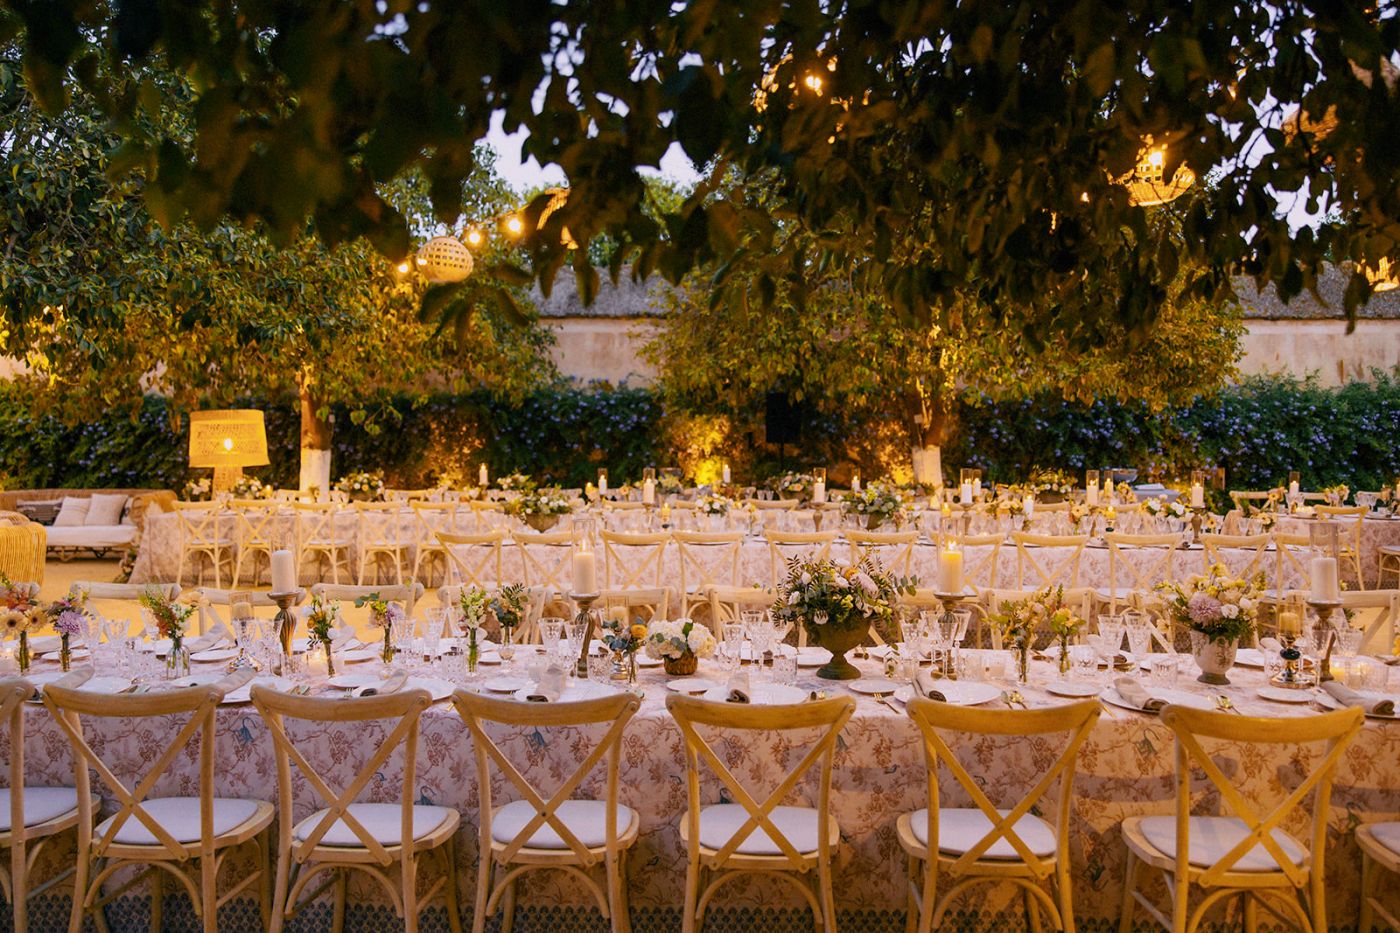 Night view of the tables at the Lebanese wedding in Sevilla Spain